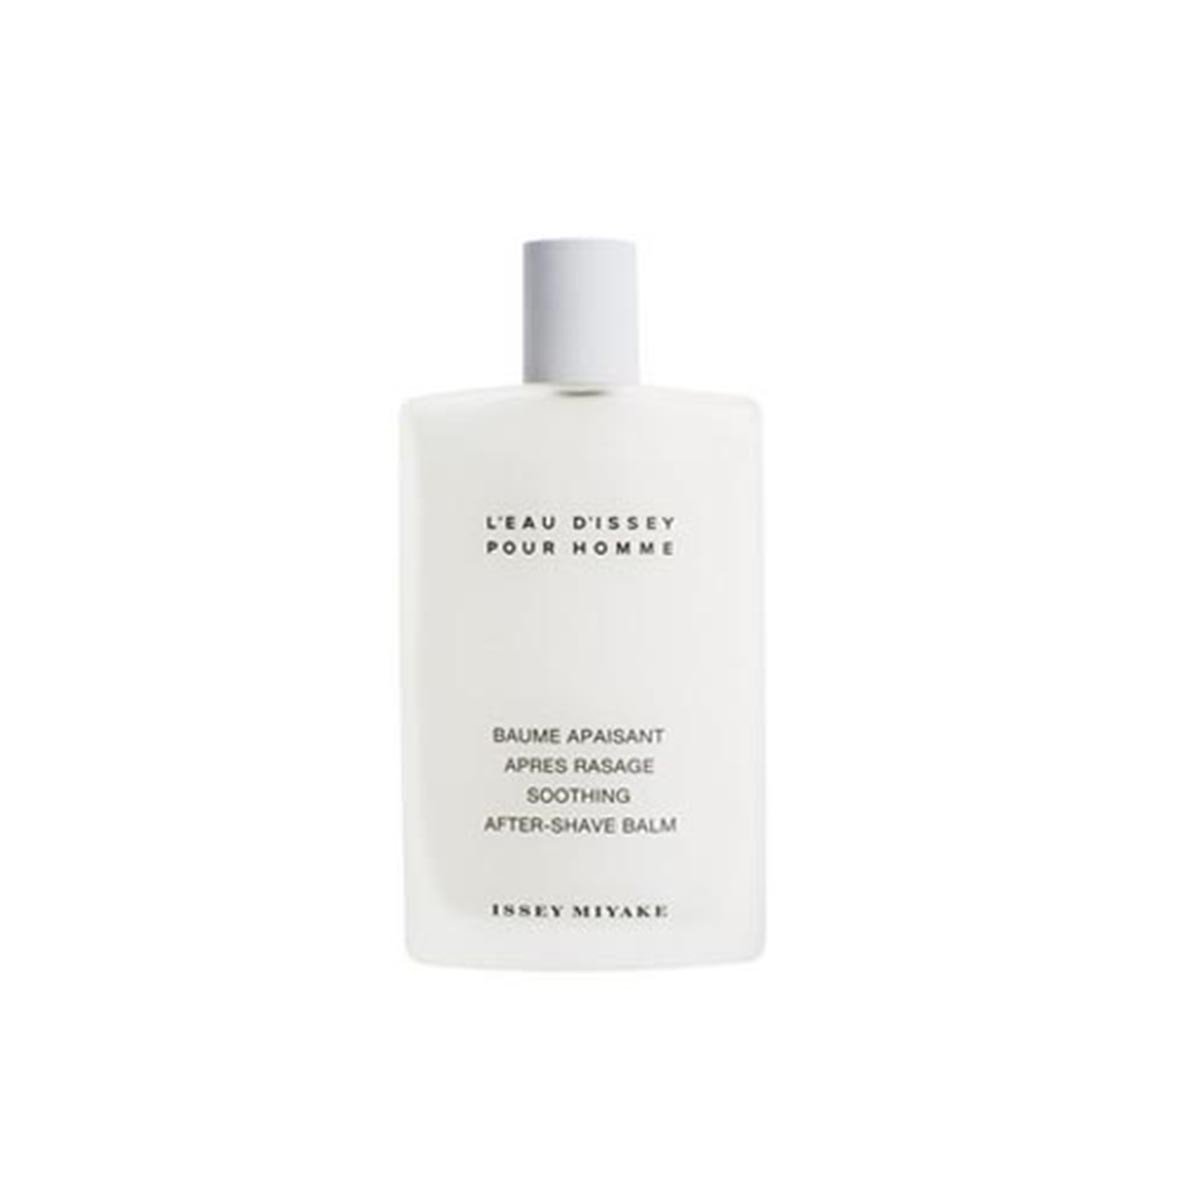 issey-miyake-per-man-after-shave-leau-dissey-100ml